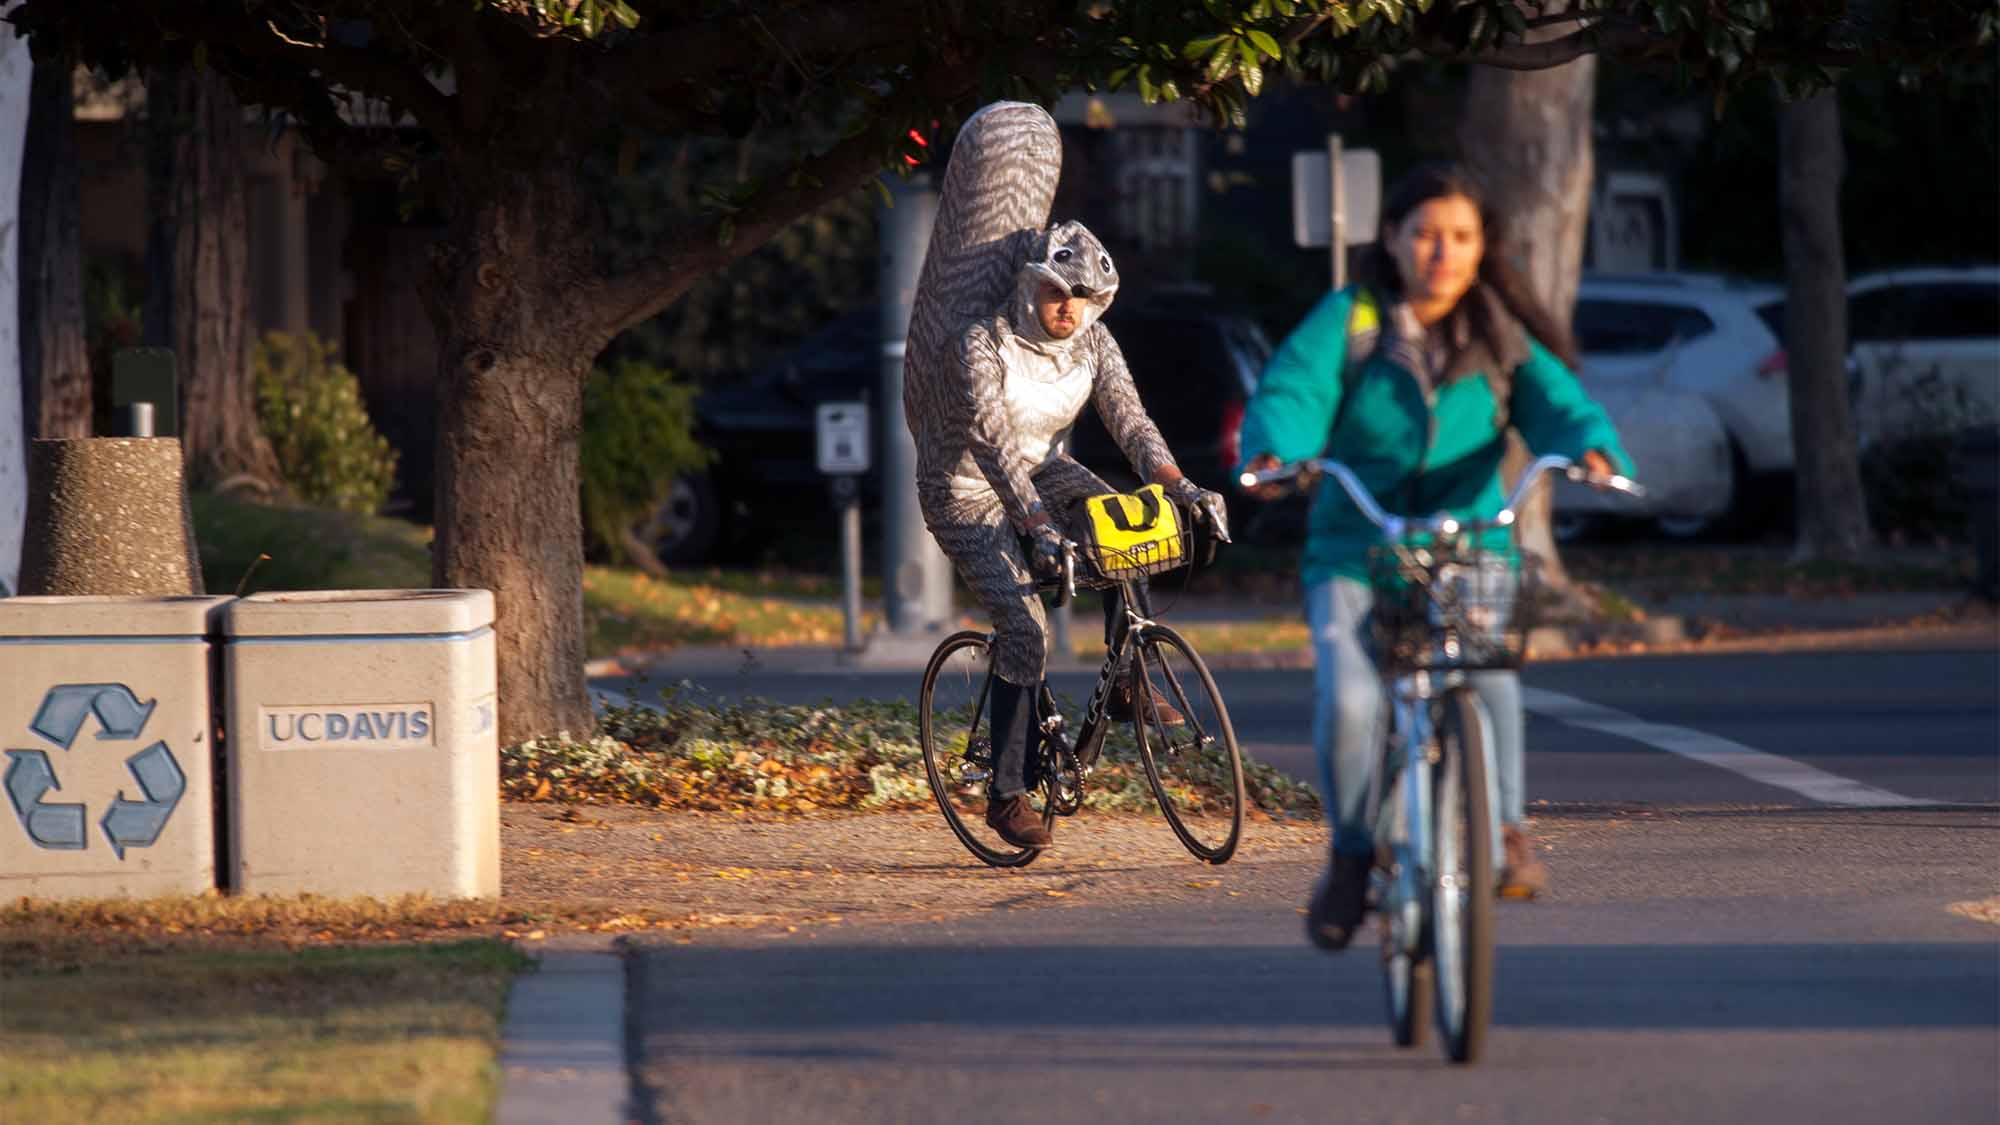 Student rides bicycle in squirrel costume.